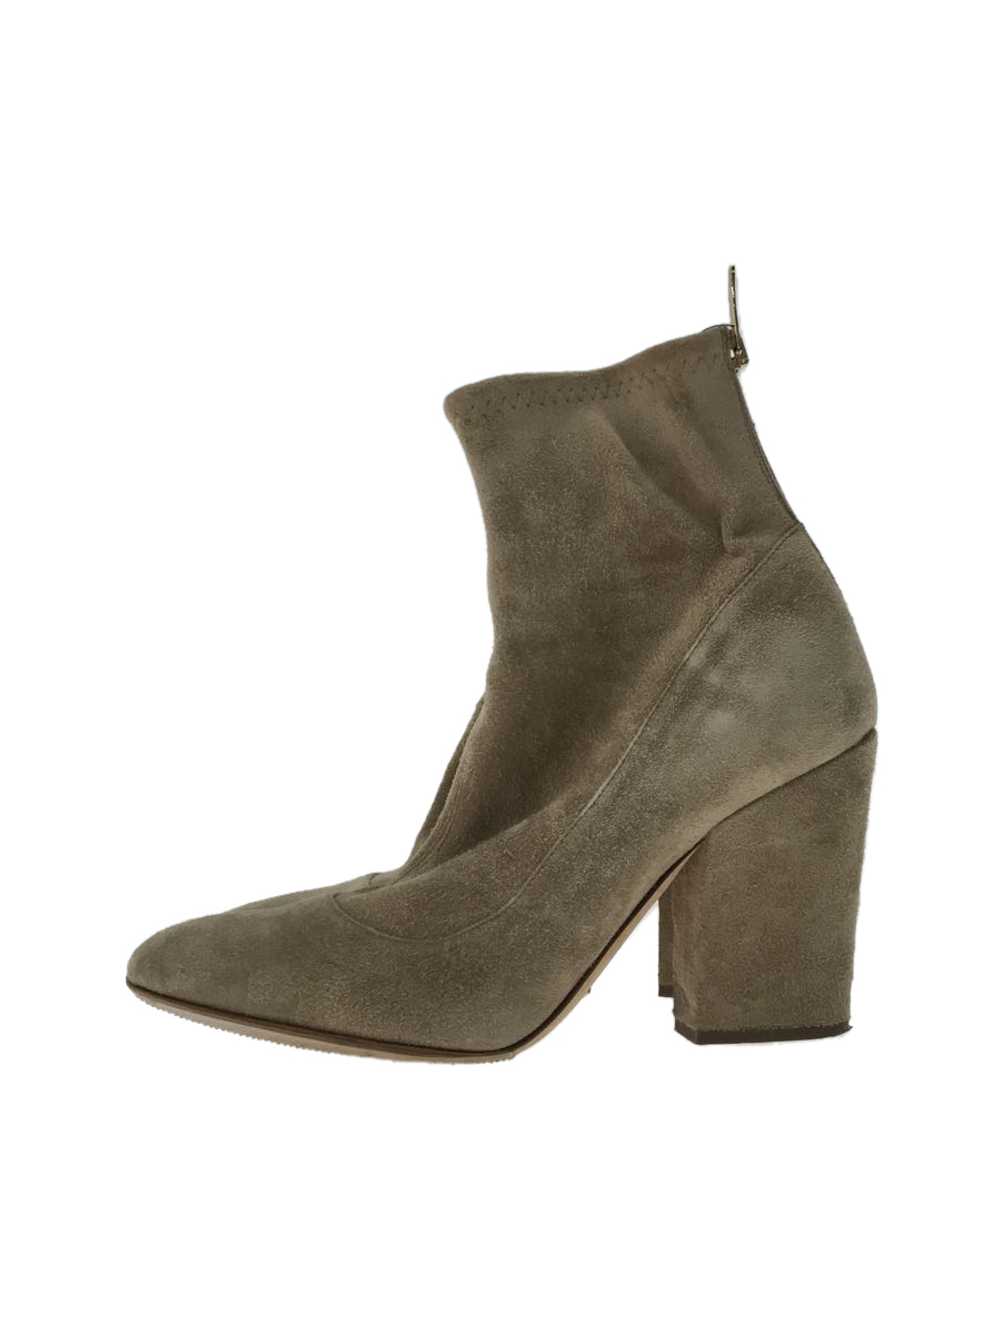 Sergio Rossi Short Boots/36/Beige/Suede Shoes BLI… - image 1